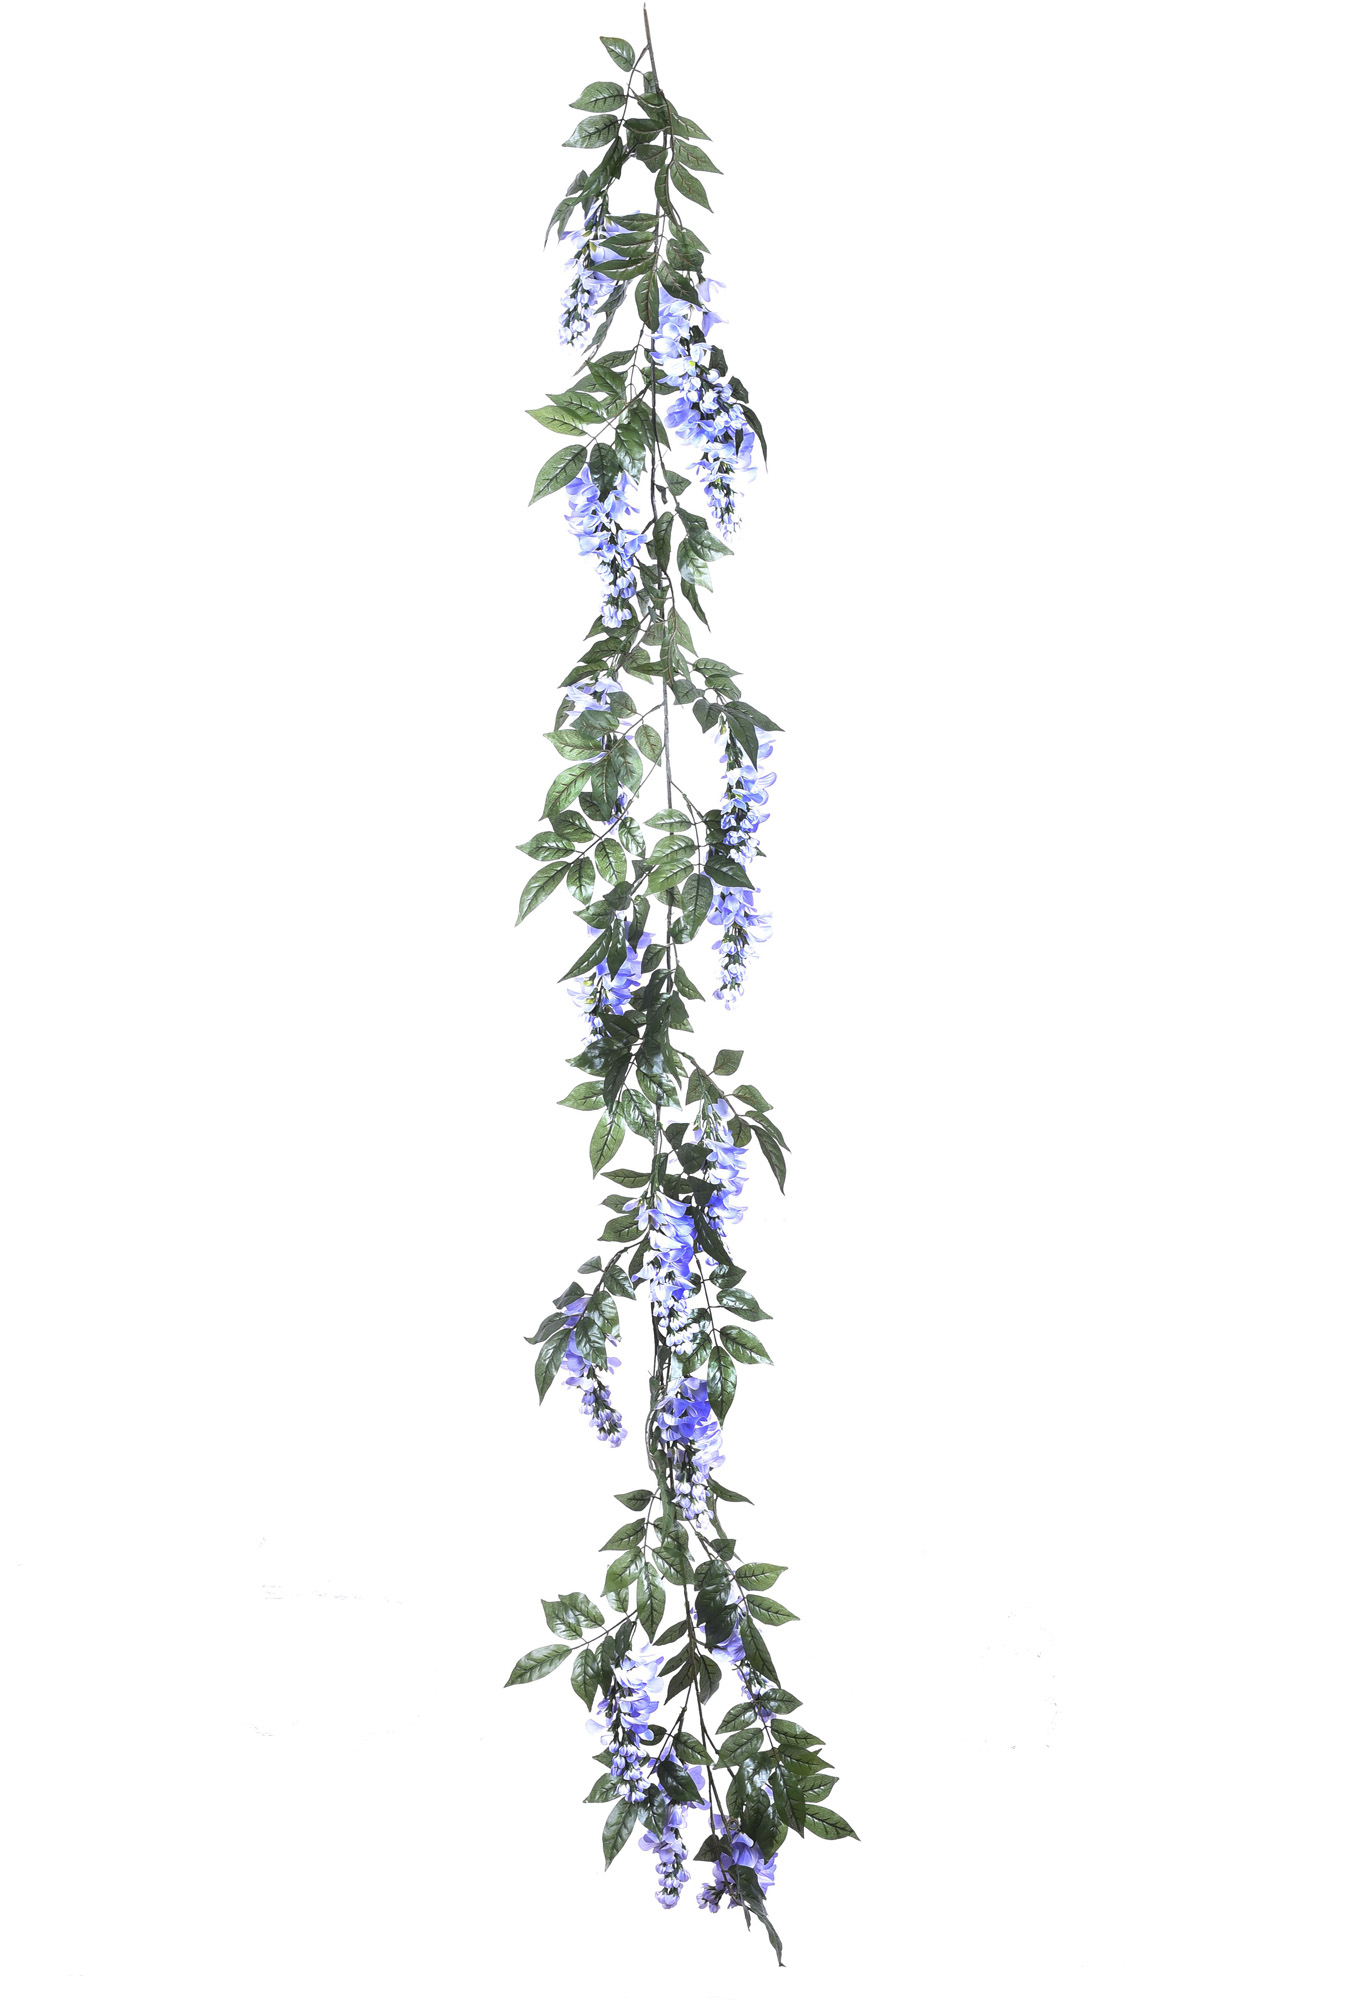 CHRISTMAS ITEMS,DRIED FLOWERS AND STEM ITEMS FOR CHRISTMAS,GHIRLANDA GLICINE 180 CM